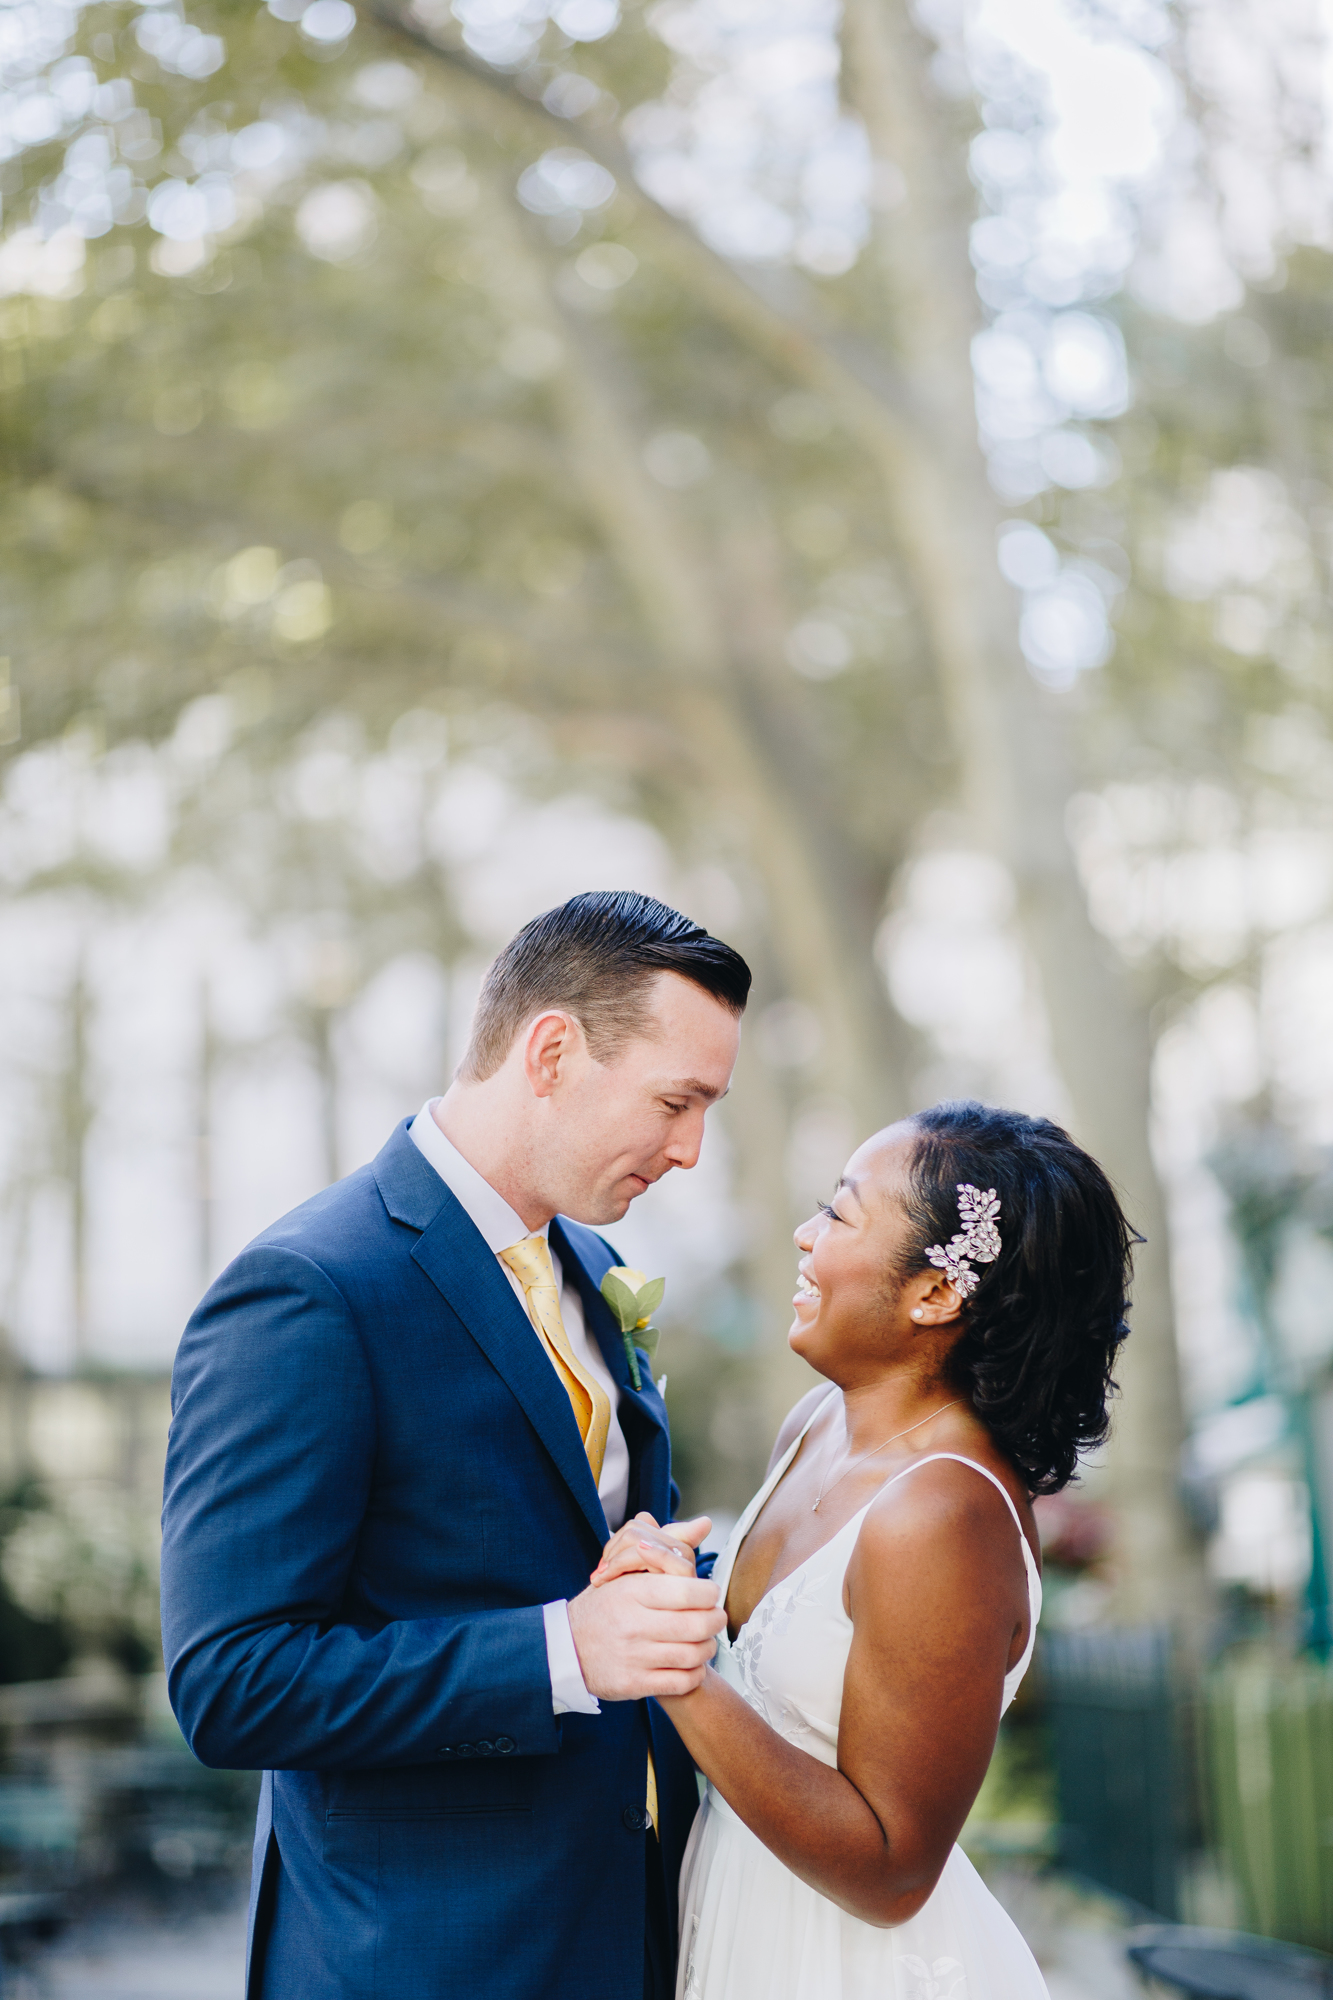 Summertime Bryant Park Wedding Photos during NYC Elopement